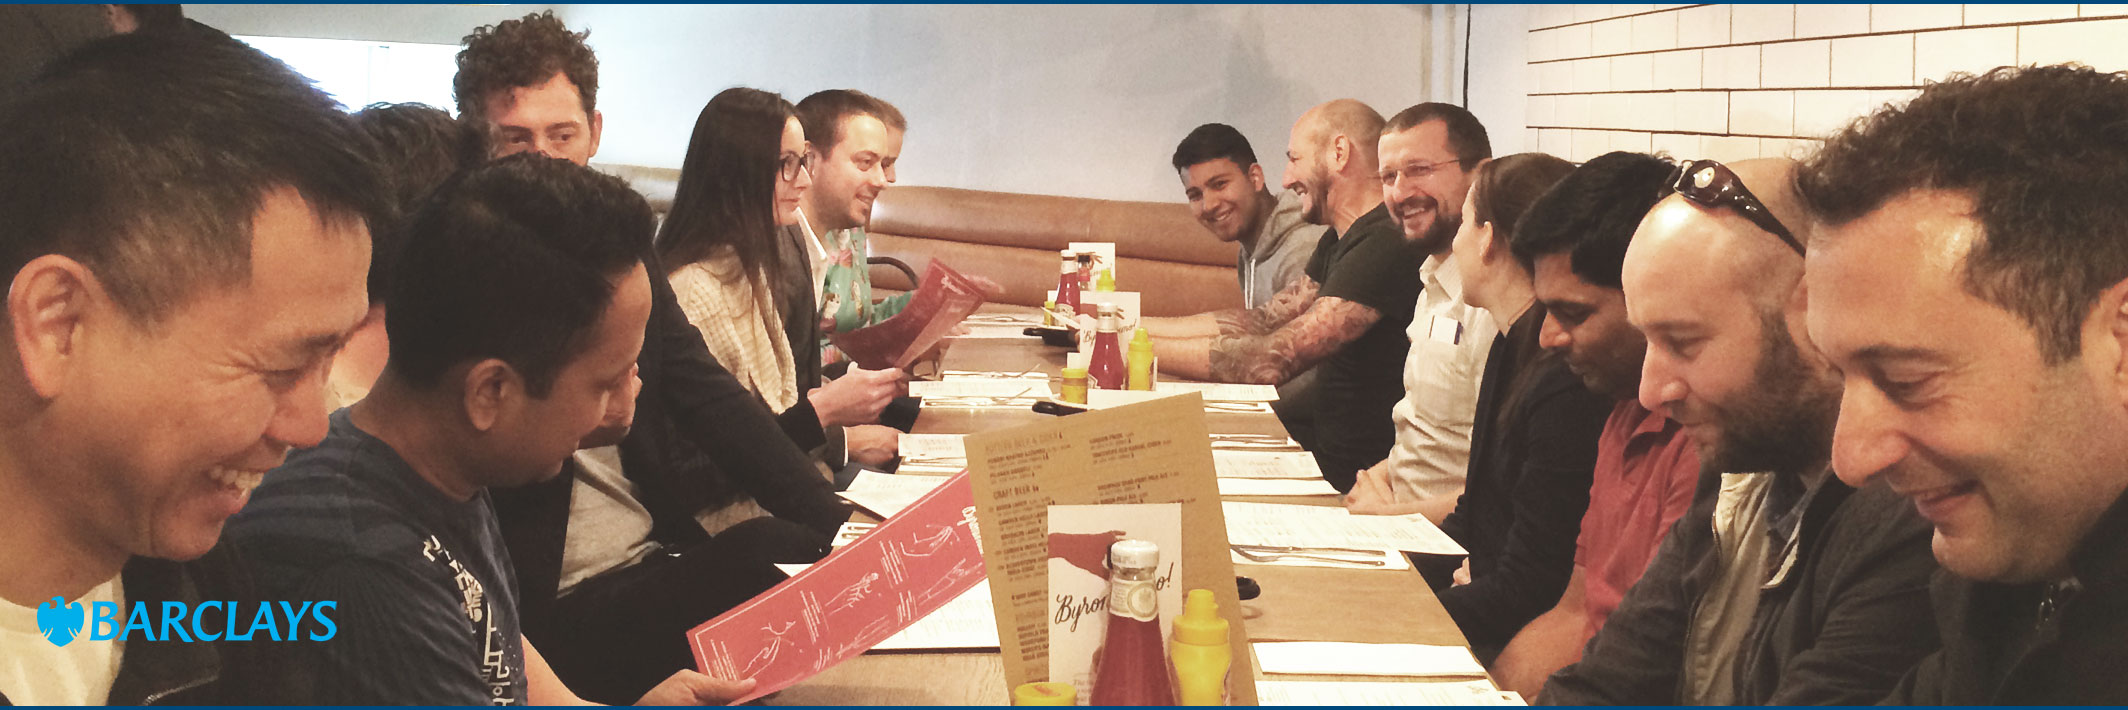 The design team having lunch together on Friday